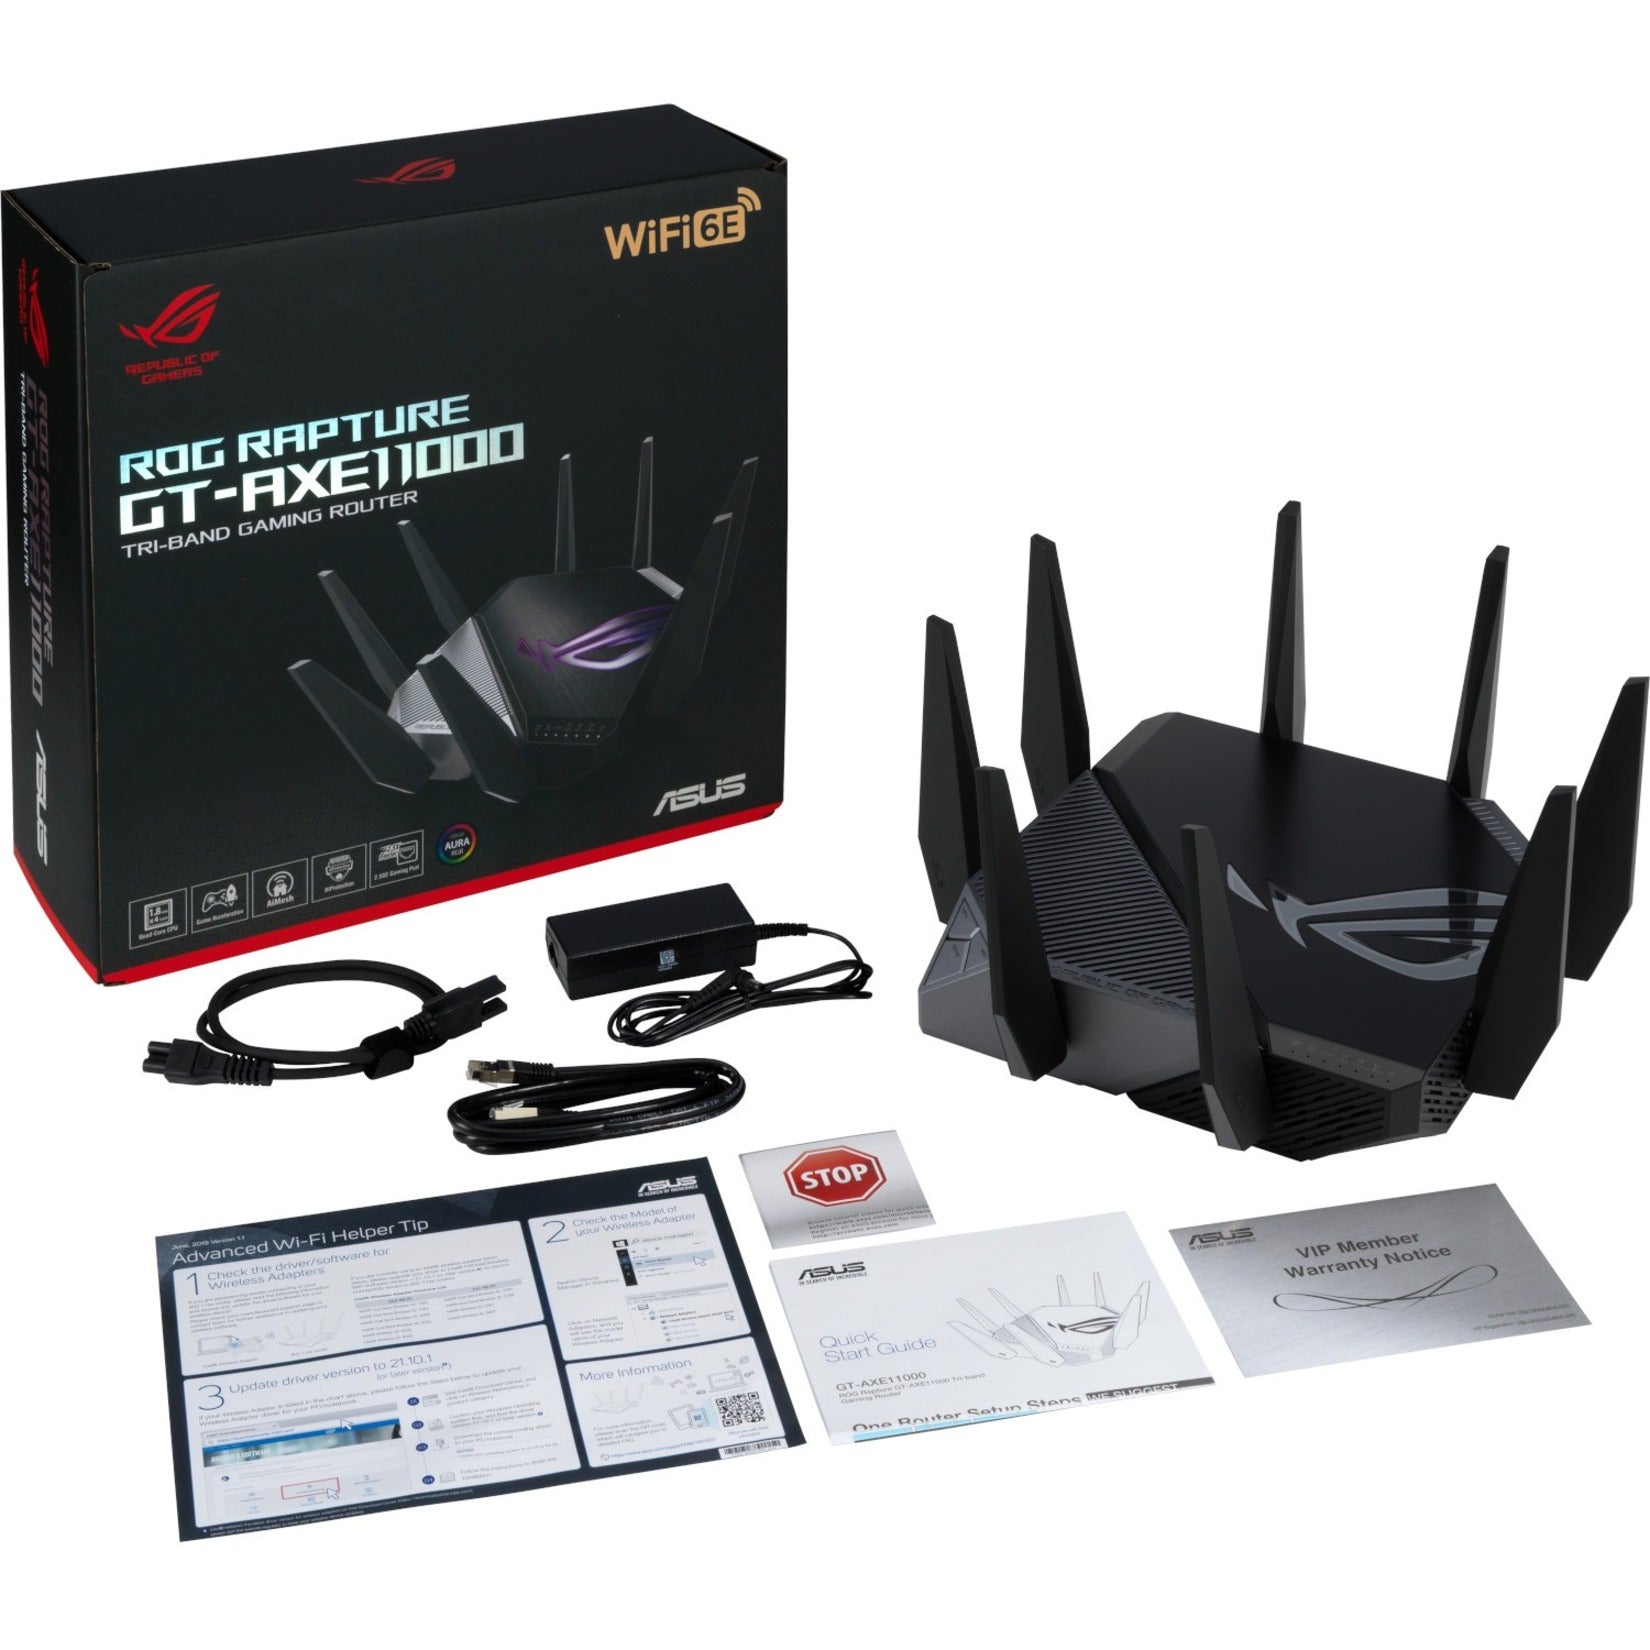 ASUS WiFi 6E Gaming Router (ROG Rapture GT-AXE11000) (90IG06E0-MA1R0T) - Tri-Band 10 Gigabit Wireless Router, World's first 6Ghz Band for Wider Channels & Higher Capacity, 1.8GHz Quad-Core processor, 2.5G Port, Gaming & Streaming. ASUS ROG GT-AXE11000 is